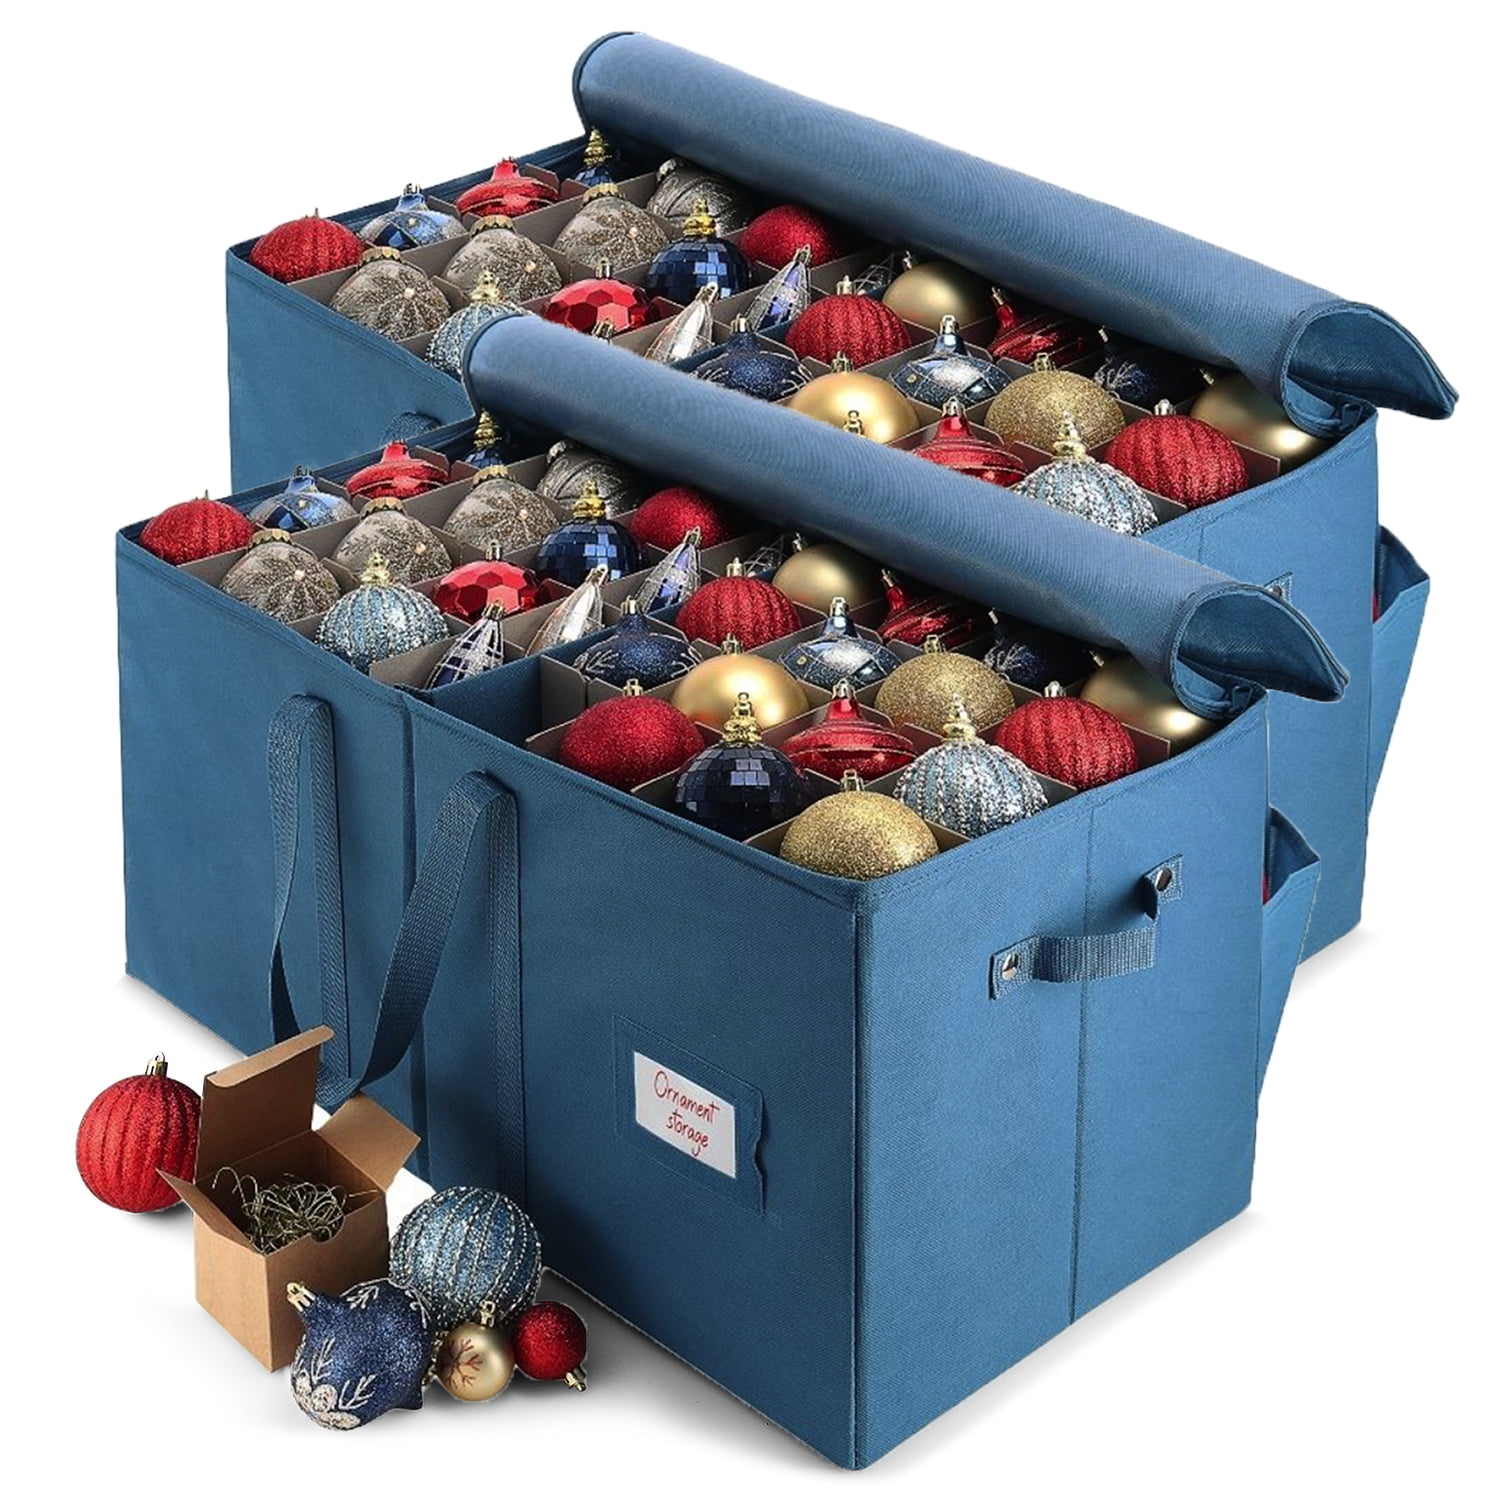 Hearth & Harbor Pack of 2 Large Christmas Ornament Storage Box with Adjustable Dividers, POLYESTER, Blue